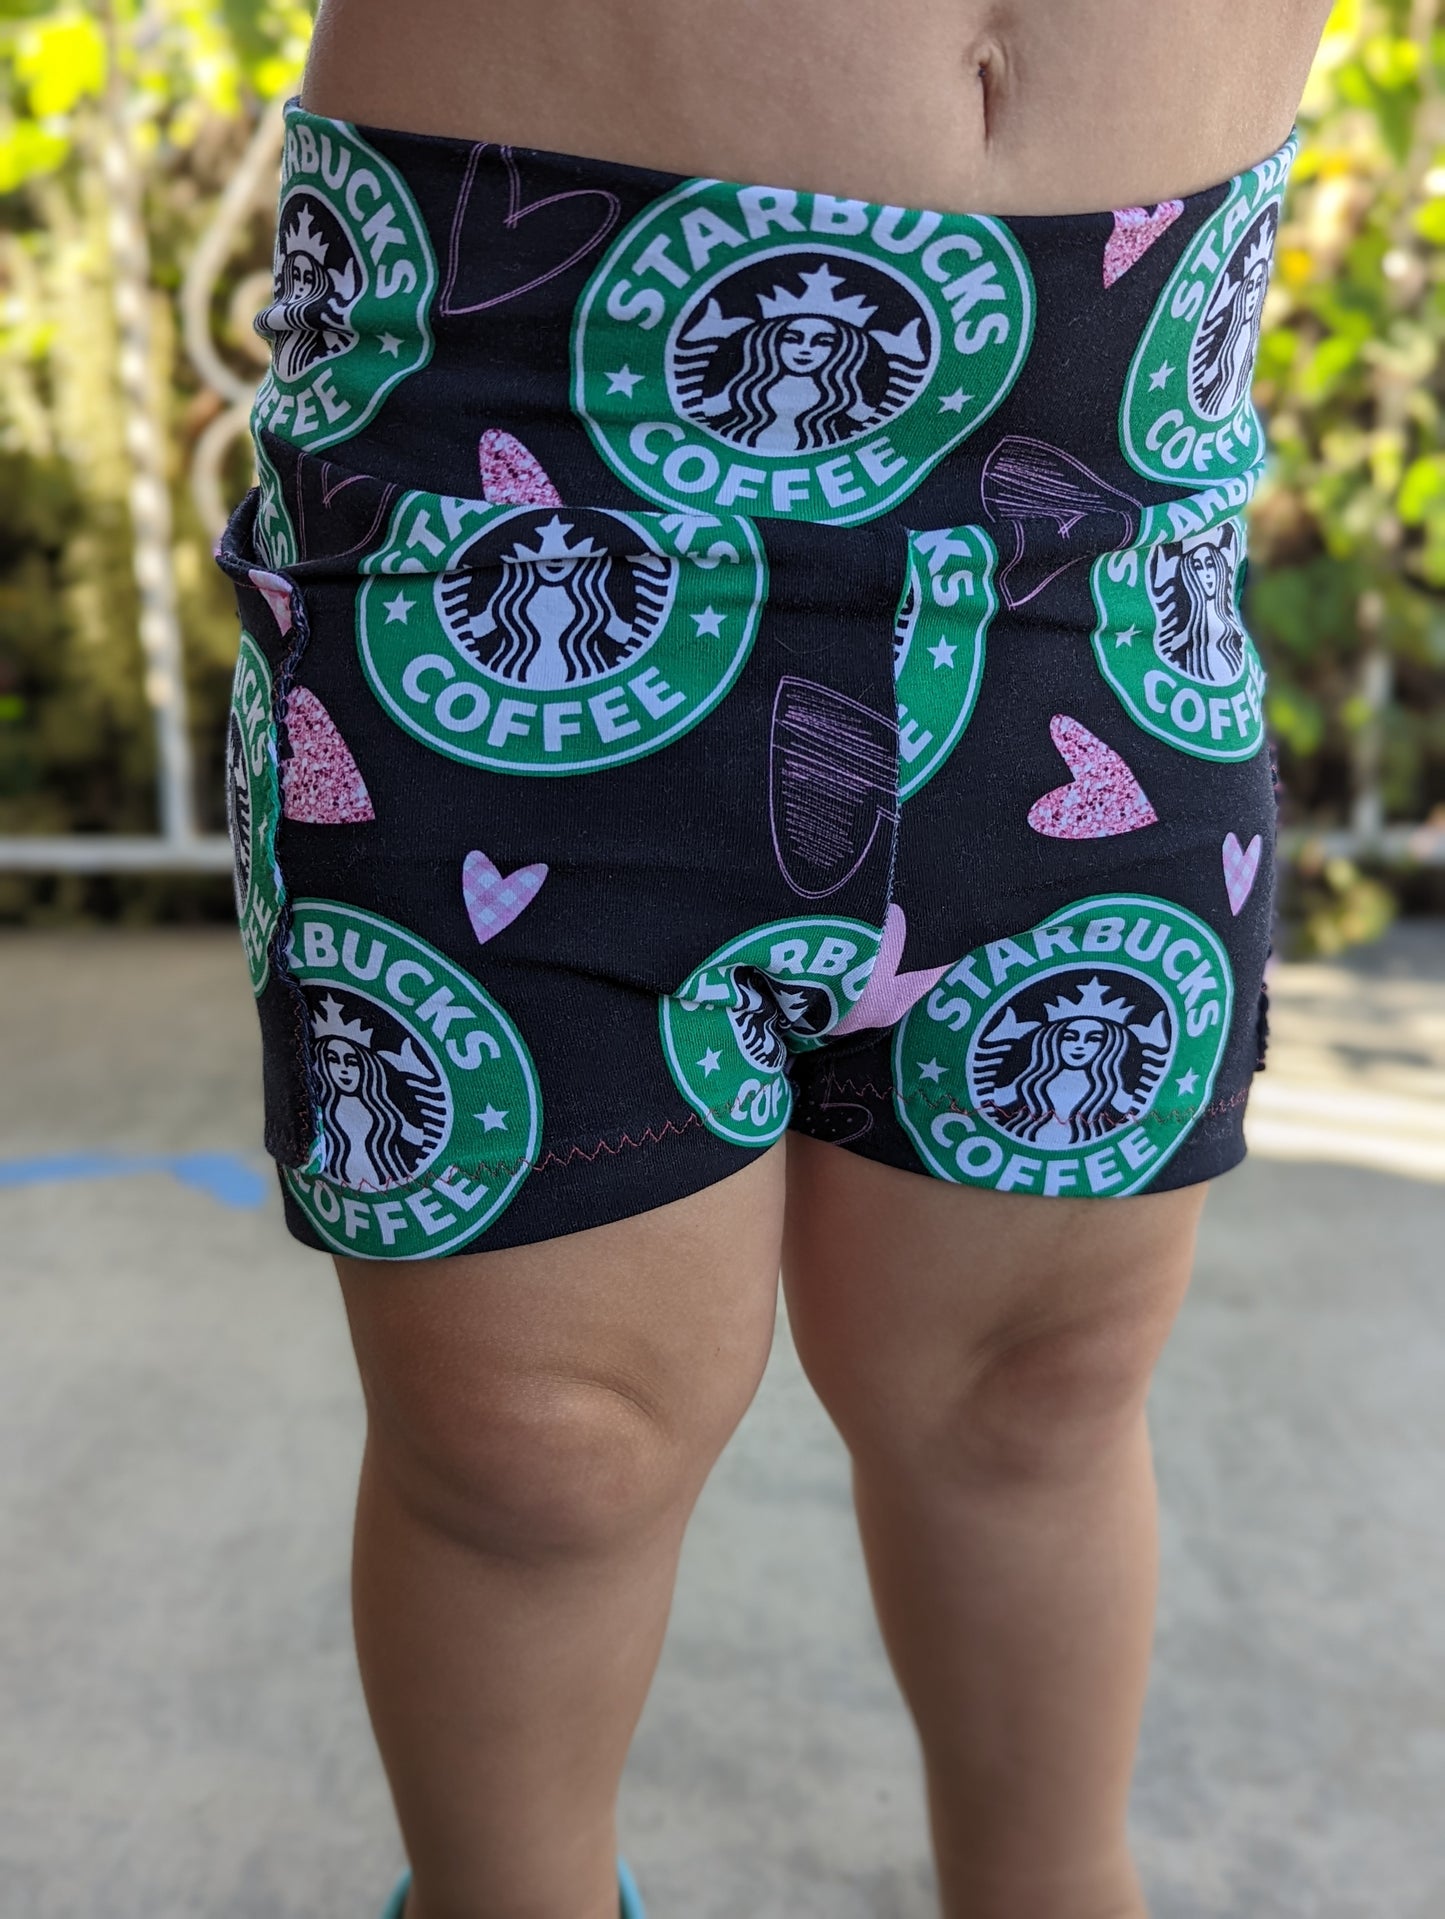 Kids Sporty Skorty Skirt, Shorts to full length yoga pants - Digital PDF Sewing Pattern - Size Preemie to 20 youth